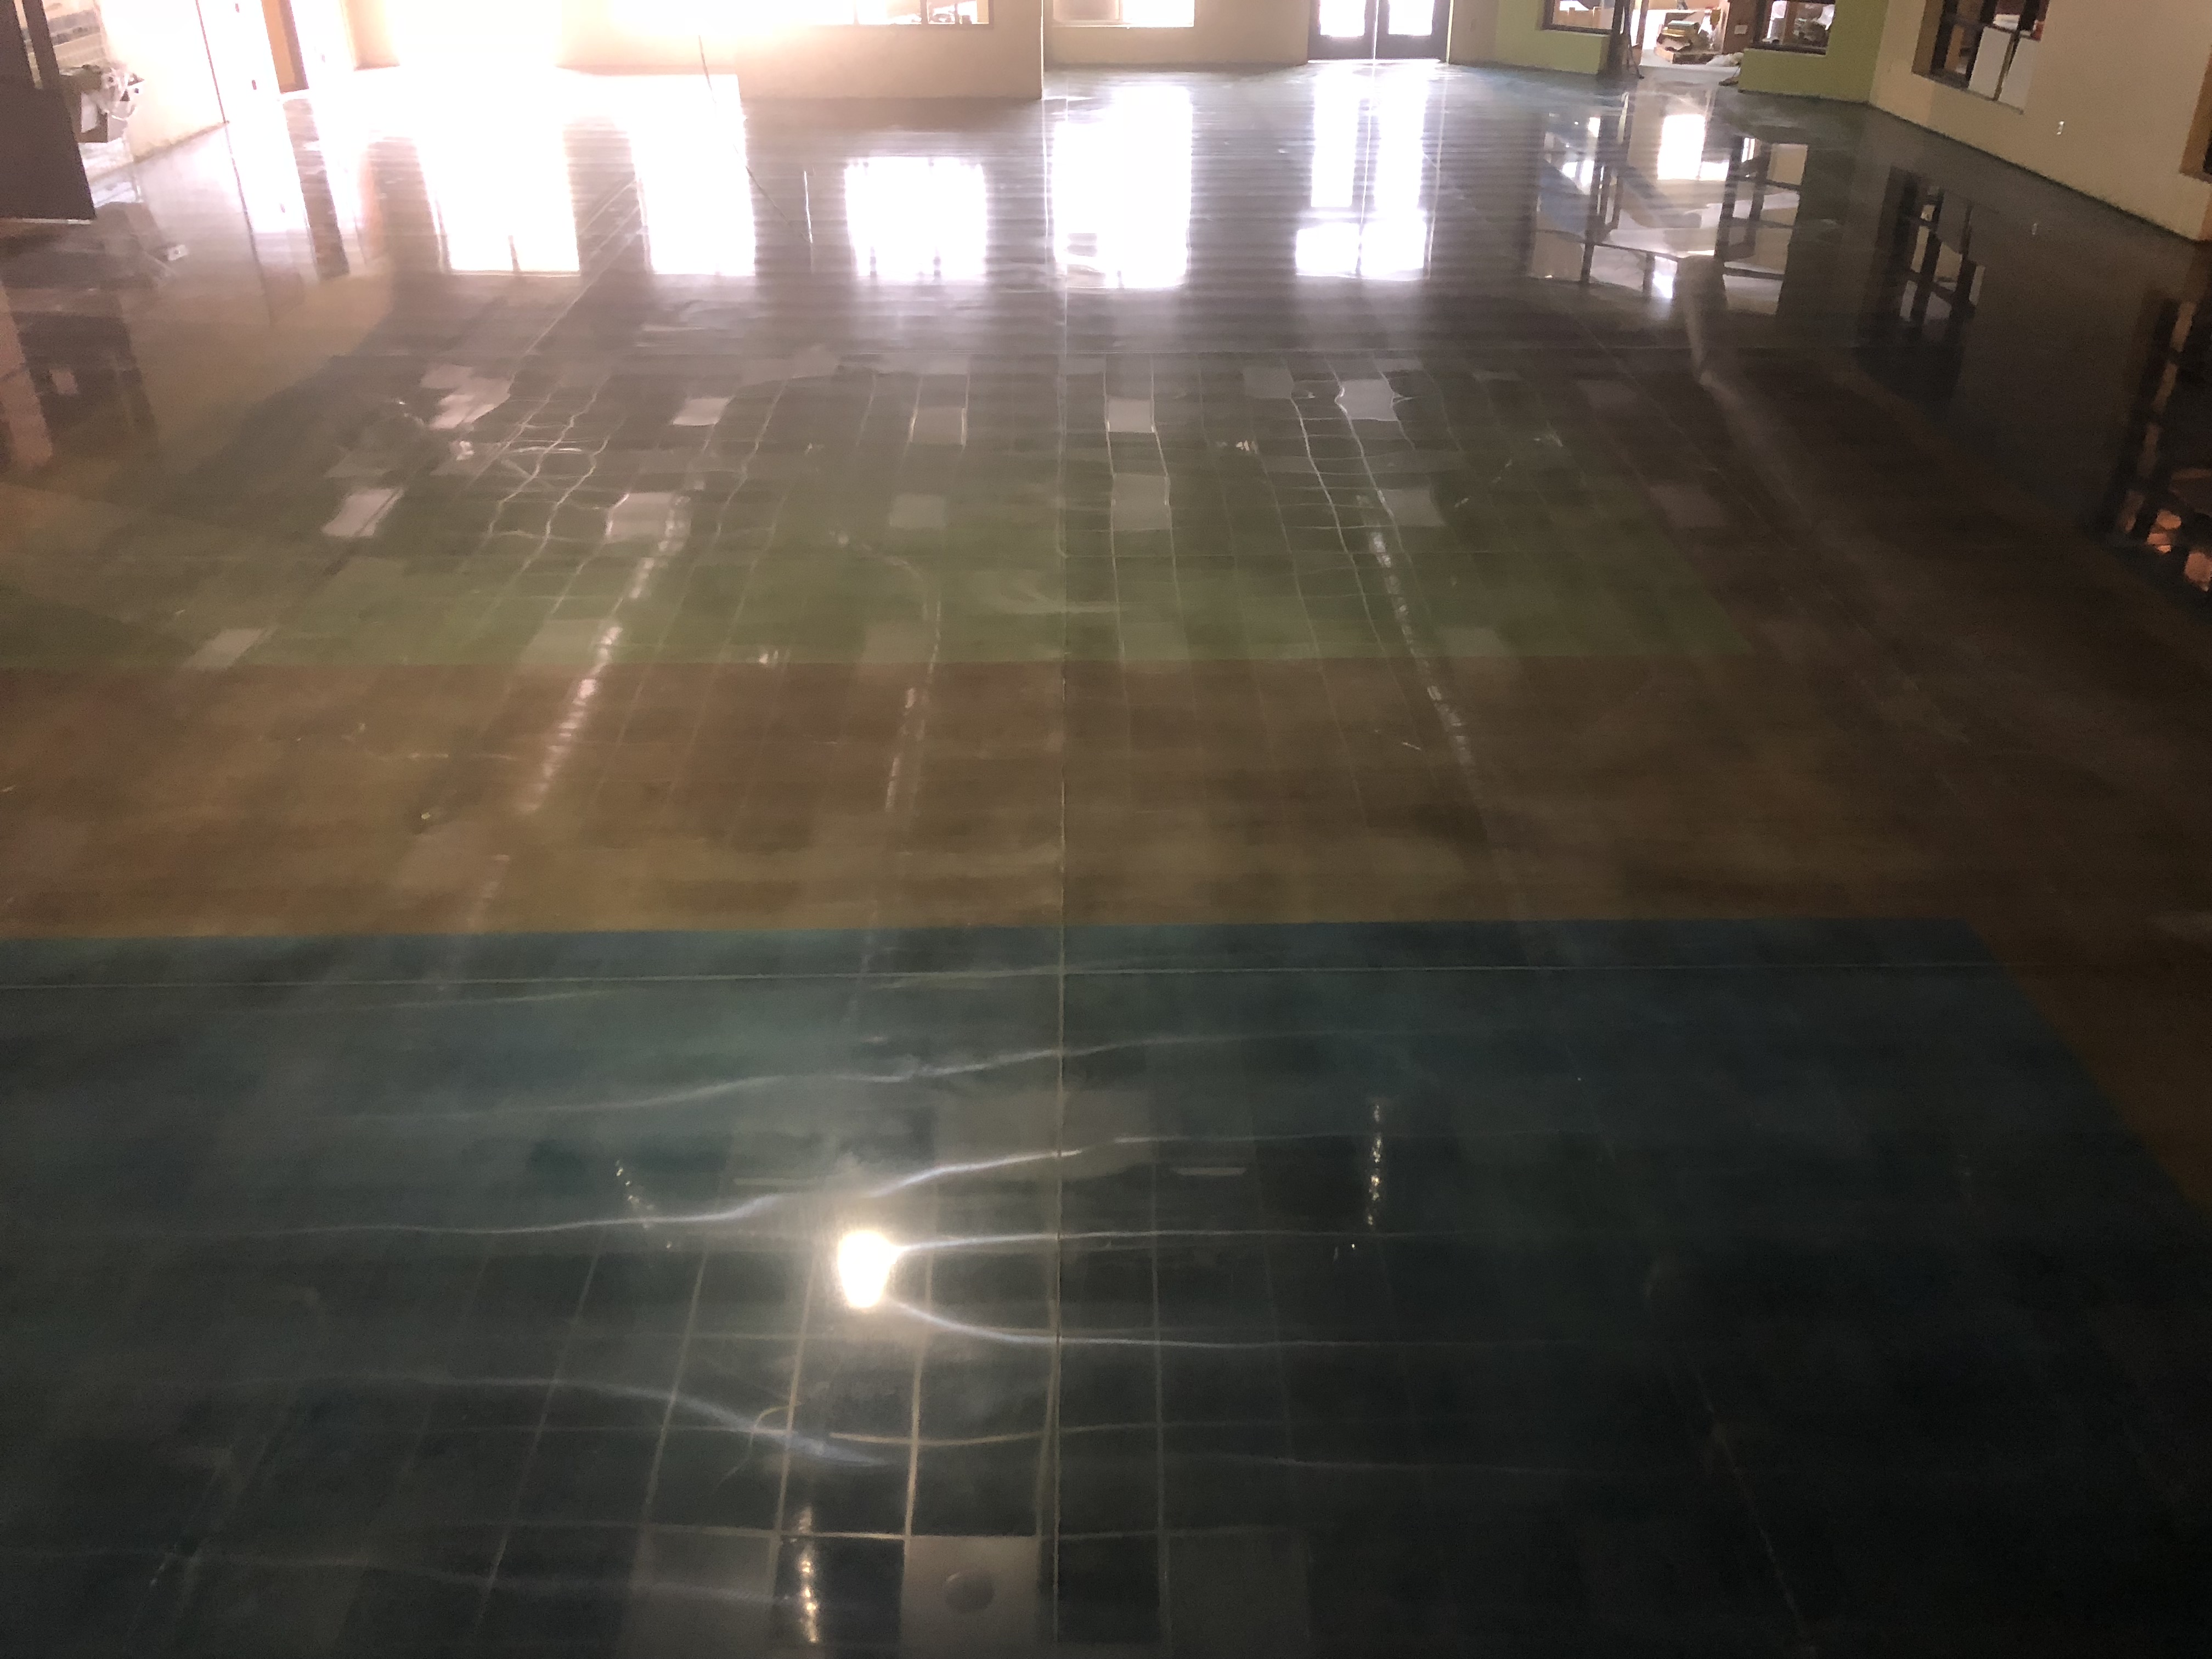 Lights reflect off of this gorgeously pattened green and blue concrete floor with a brown seperation